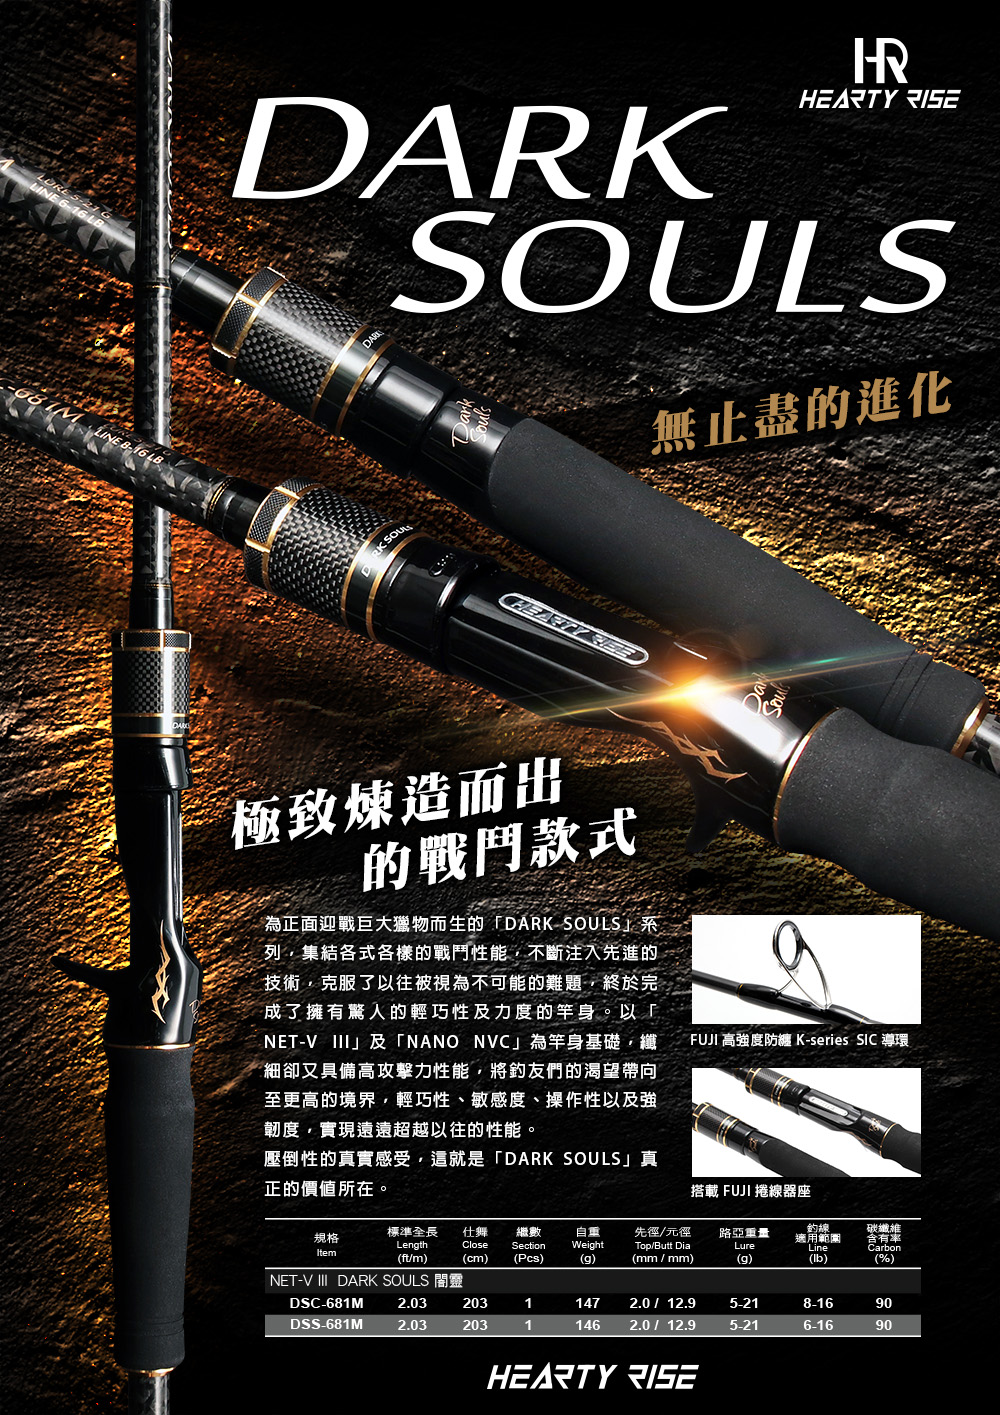 NEW PRODUCT】DARK SOULS - FRESHWATER LURE ROD - HEARTY RISE